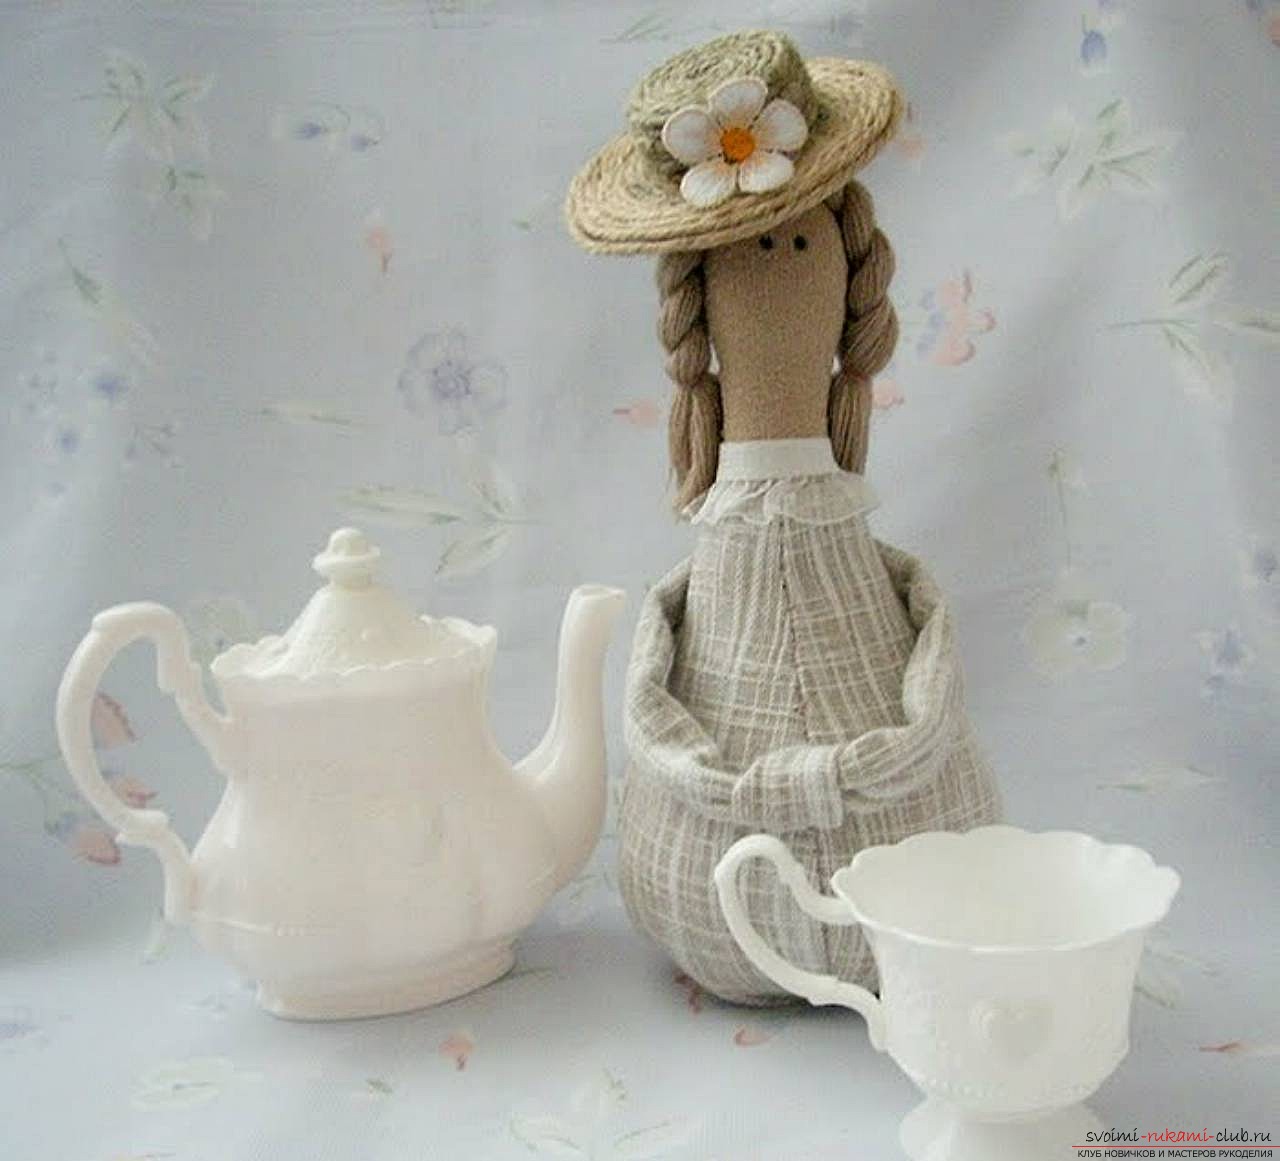 doll tilde for tea with his own hands. Photo №7